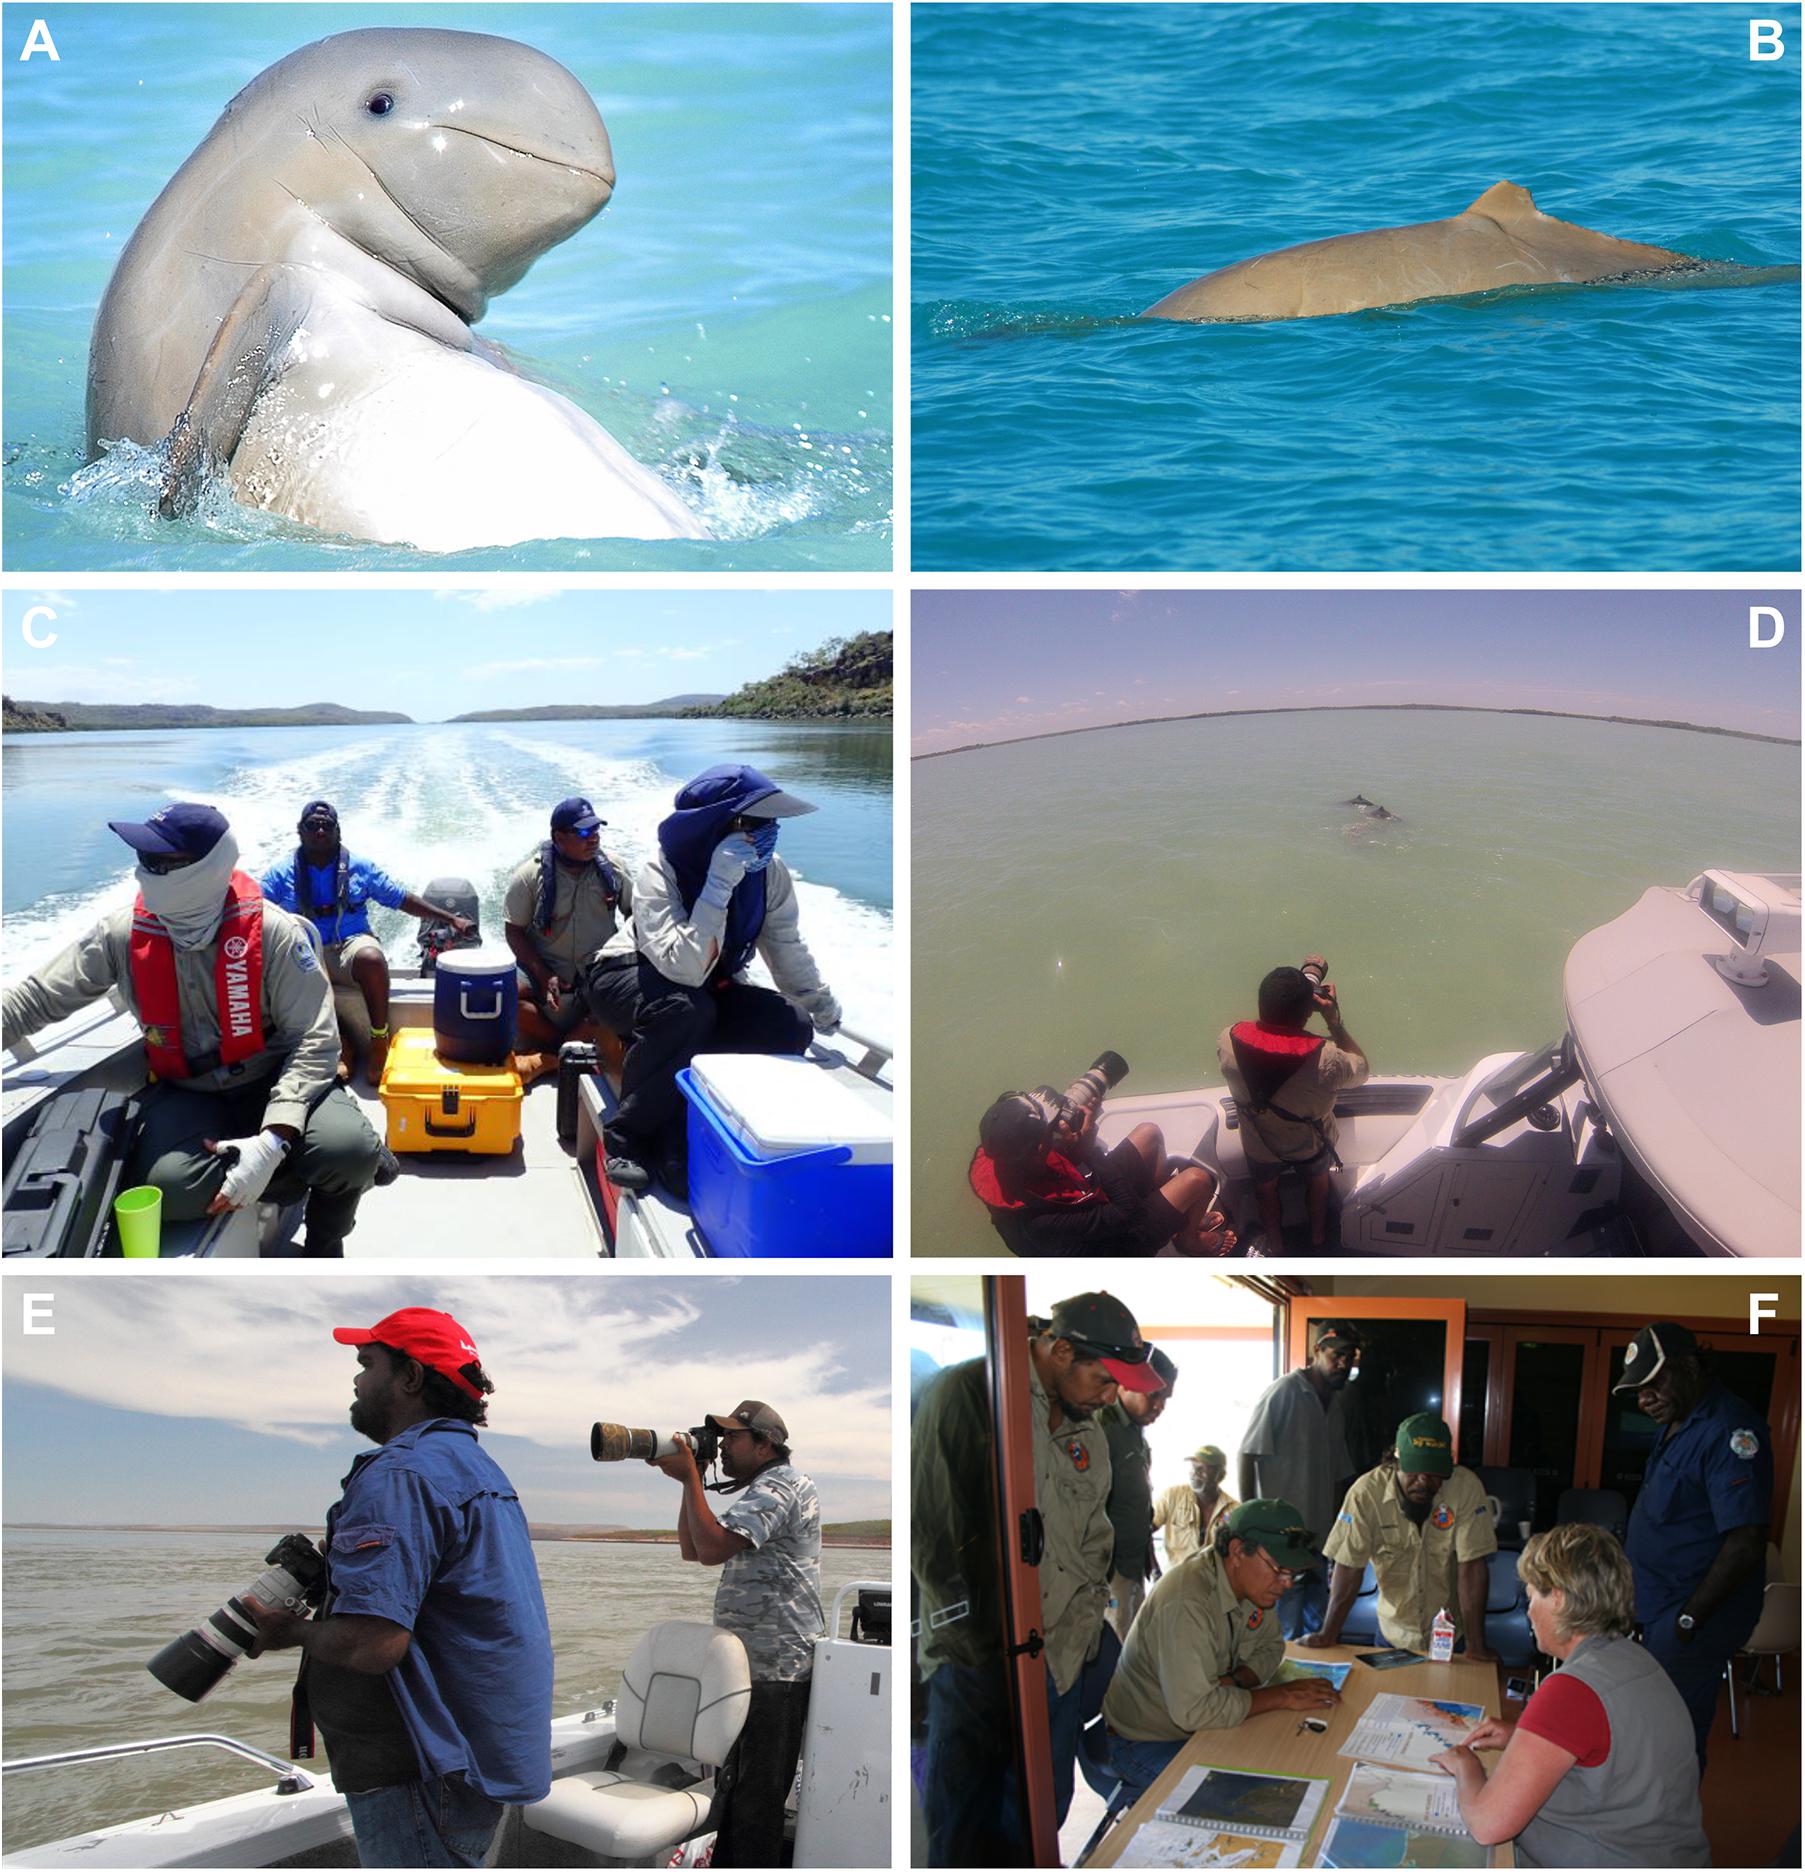 Frontiers Regional Assessment of the Conservation Status of Snubfin Dolphins (Orcaella heinsohni) in the Kimberley Region, Western Australia